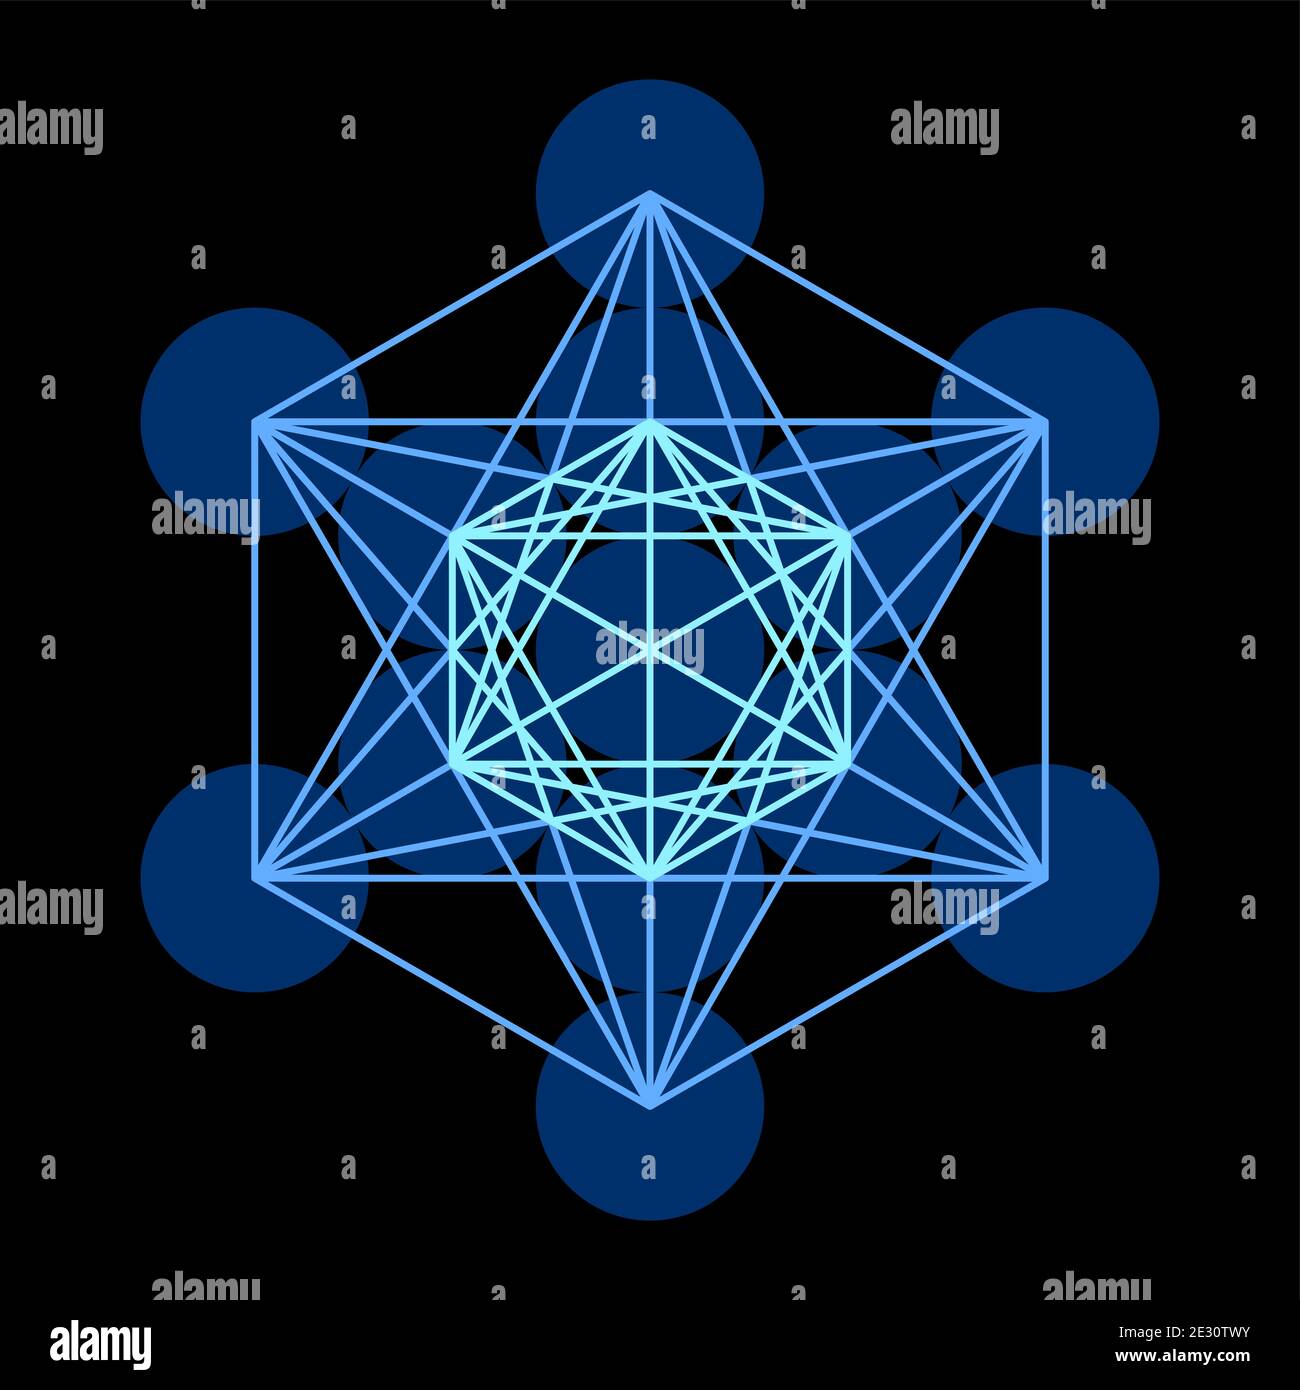 Metatrons Cube. Composition of a mystical symbol, derived from the Flower of Life. 13 circles, connected with straight lines. Sacred Geometry. Stock Photo